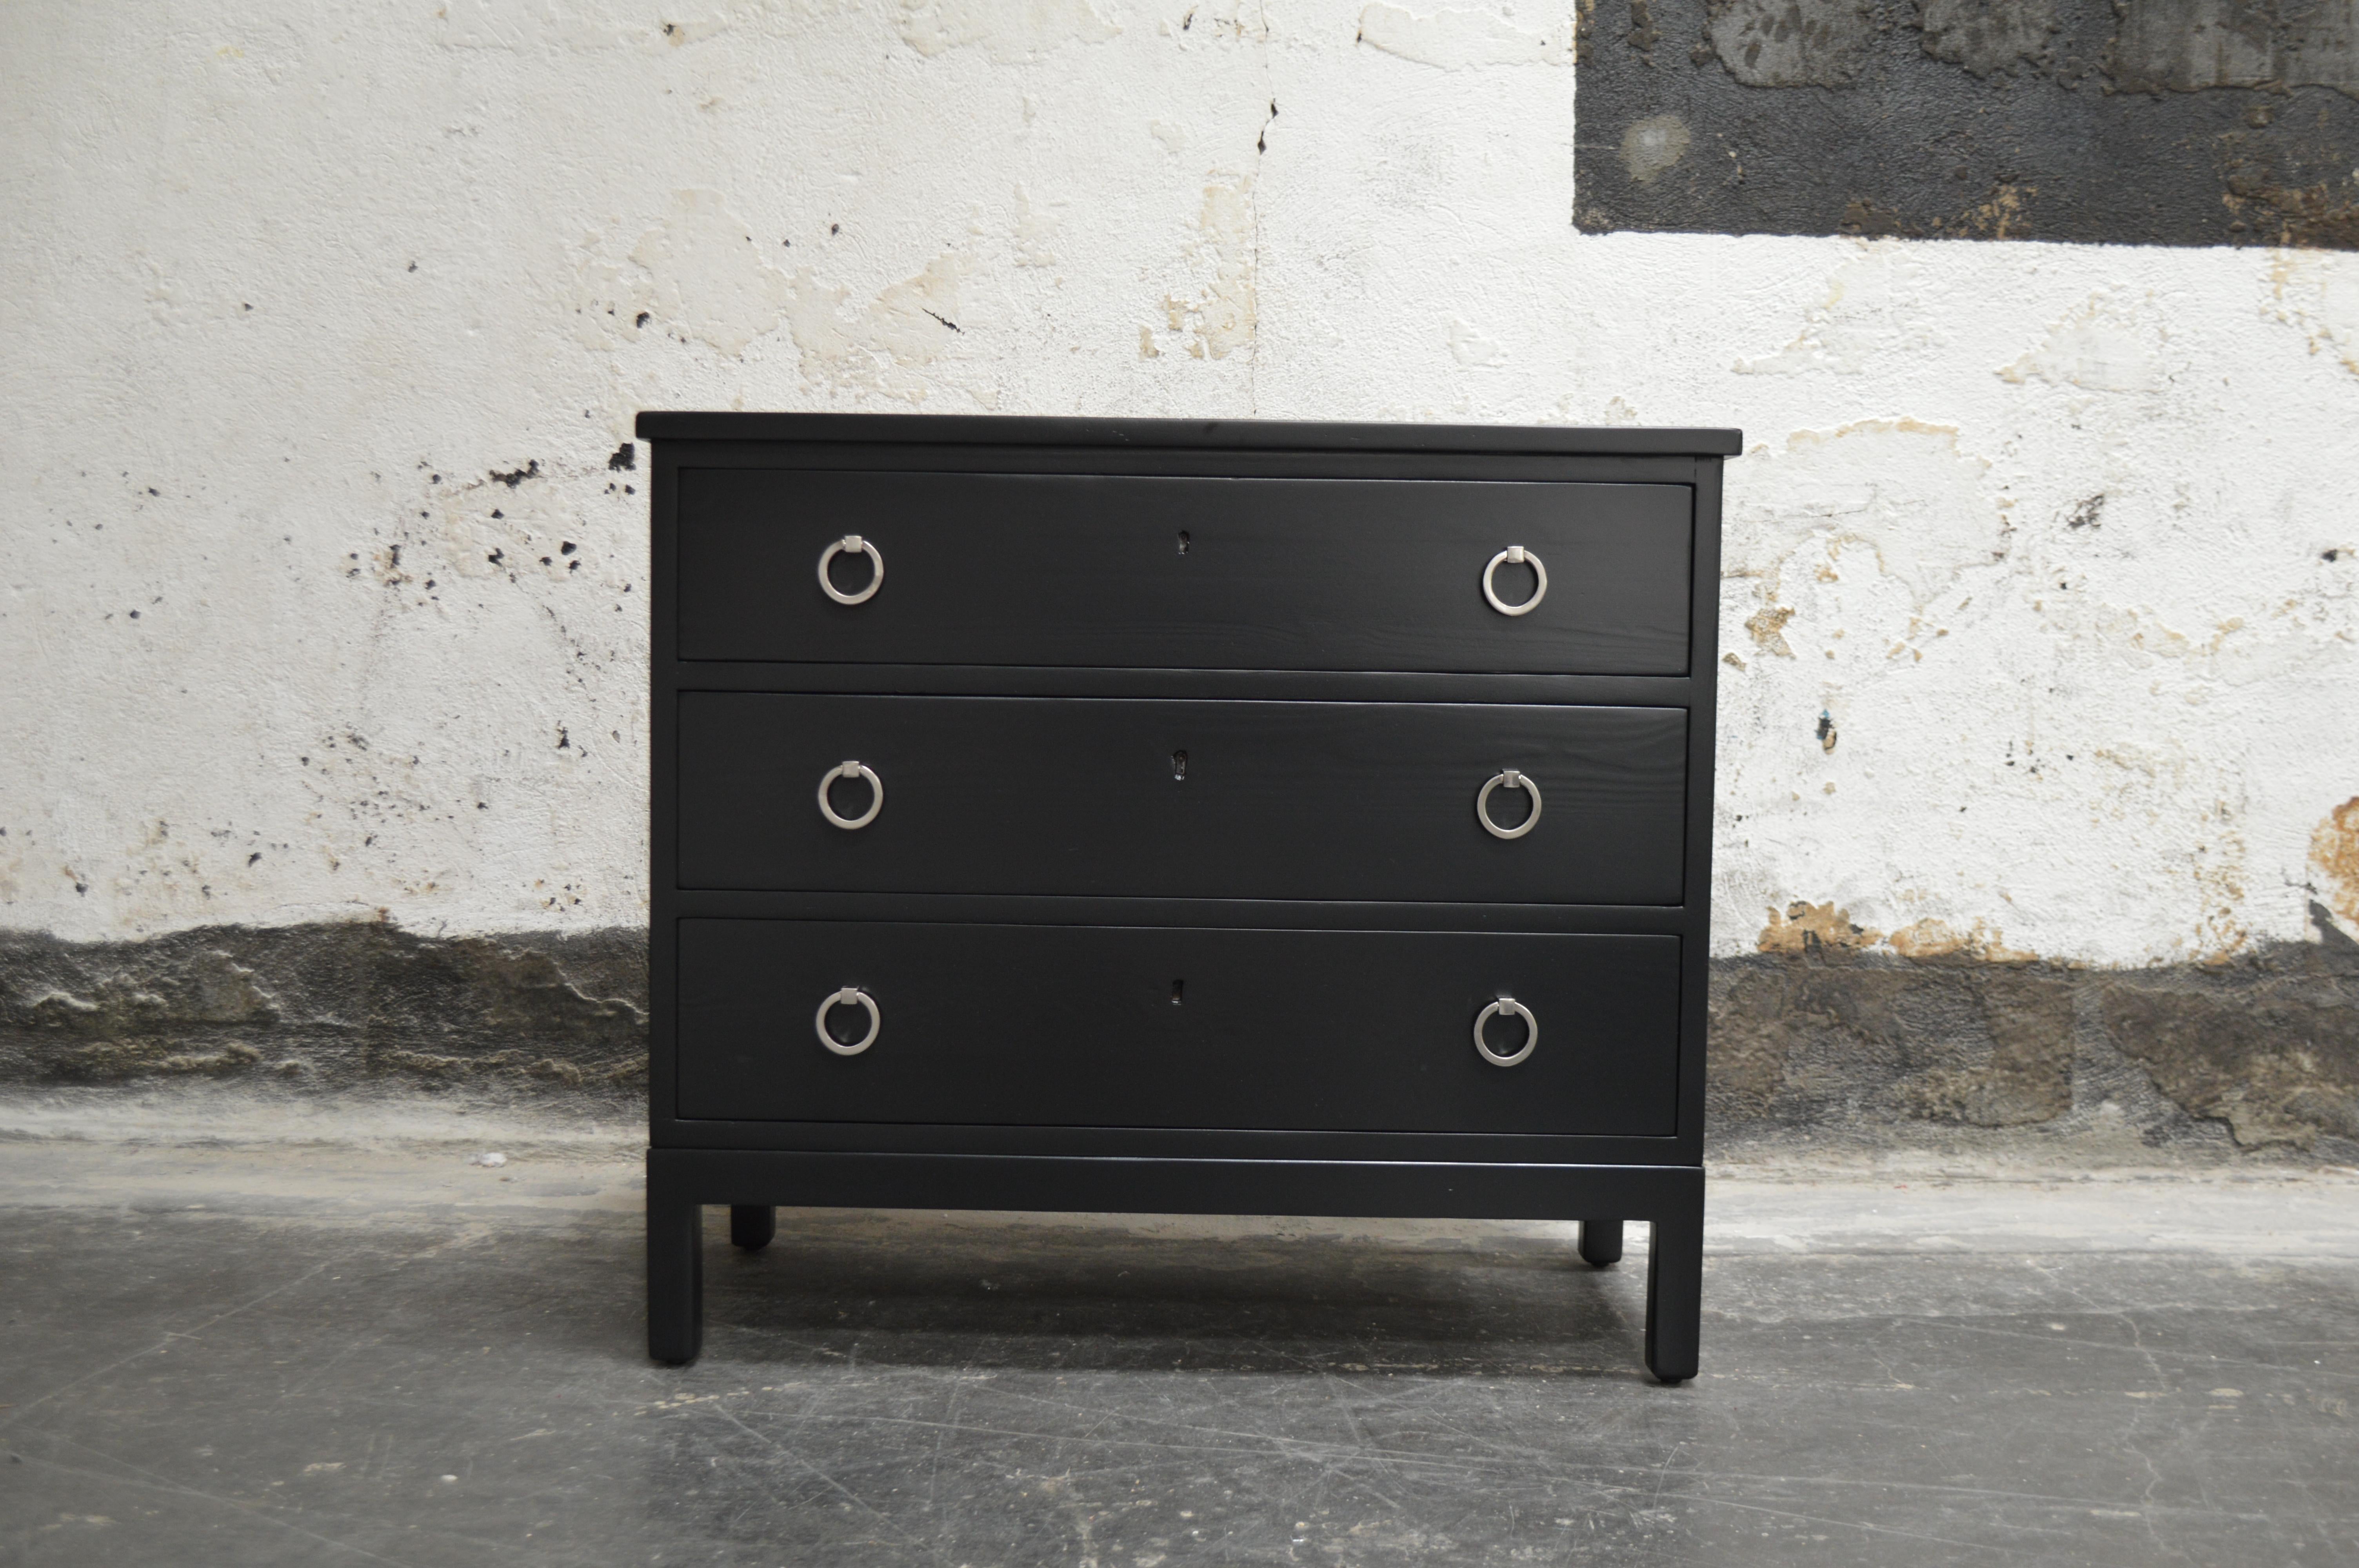 Three-drawer elm chest newly refinished in black lacquer on sleek square legs updated with brushed nickel ring hardware.

A great piece to store your bedding or clothes. A handsome piece of furniture in any room.